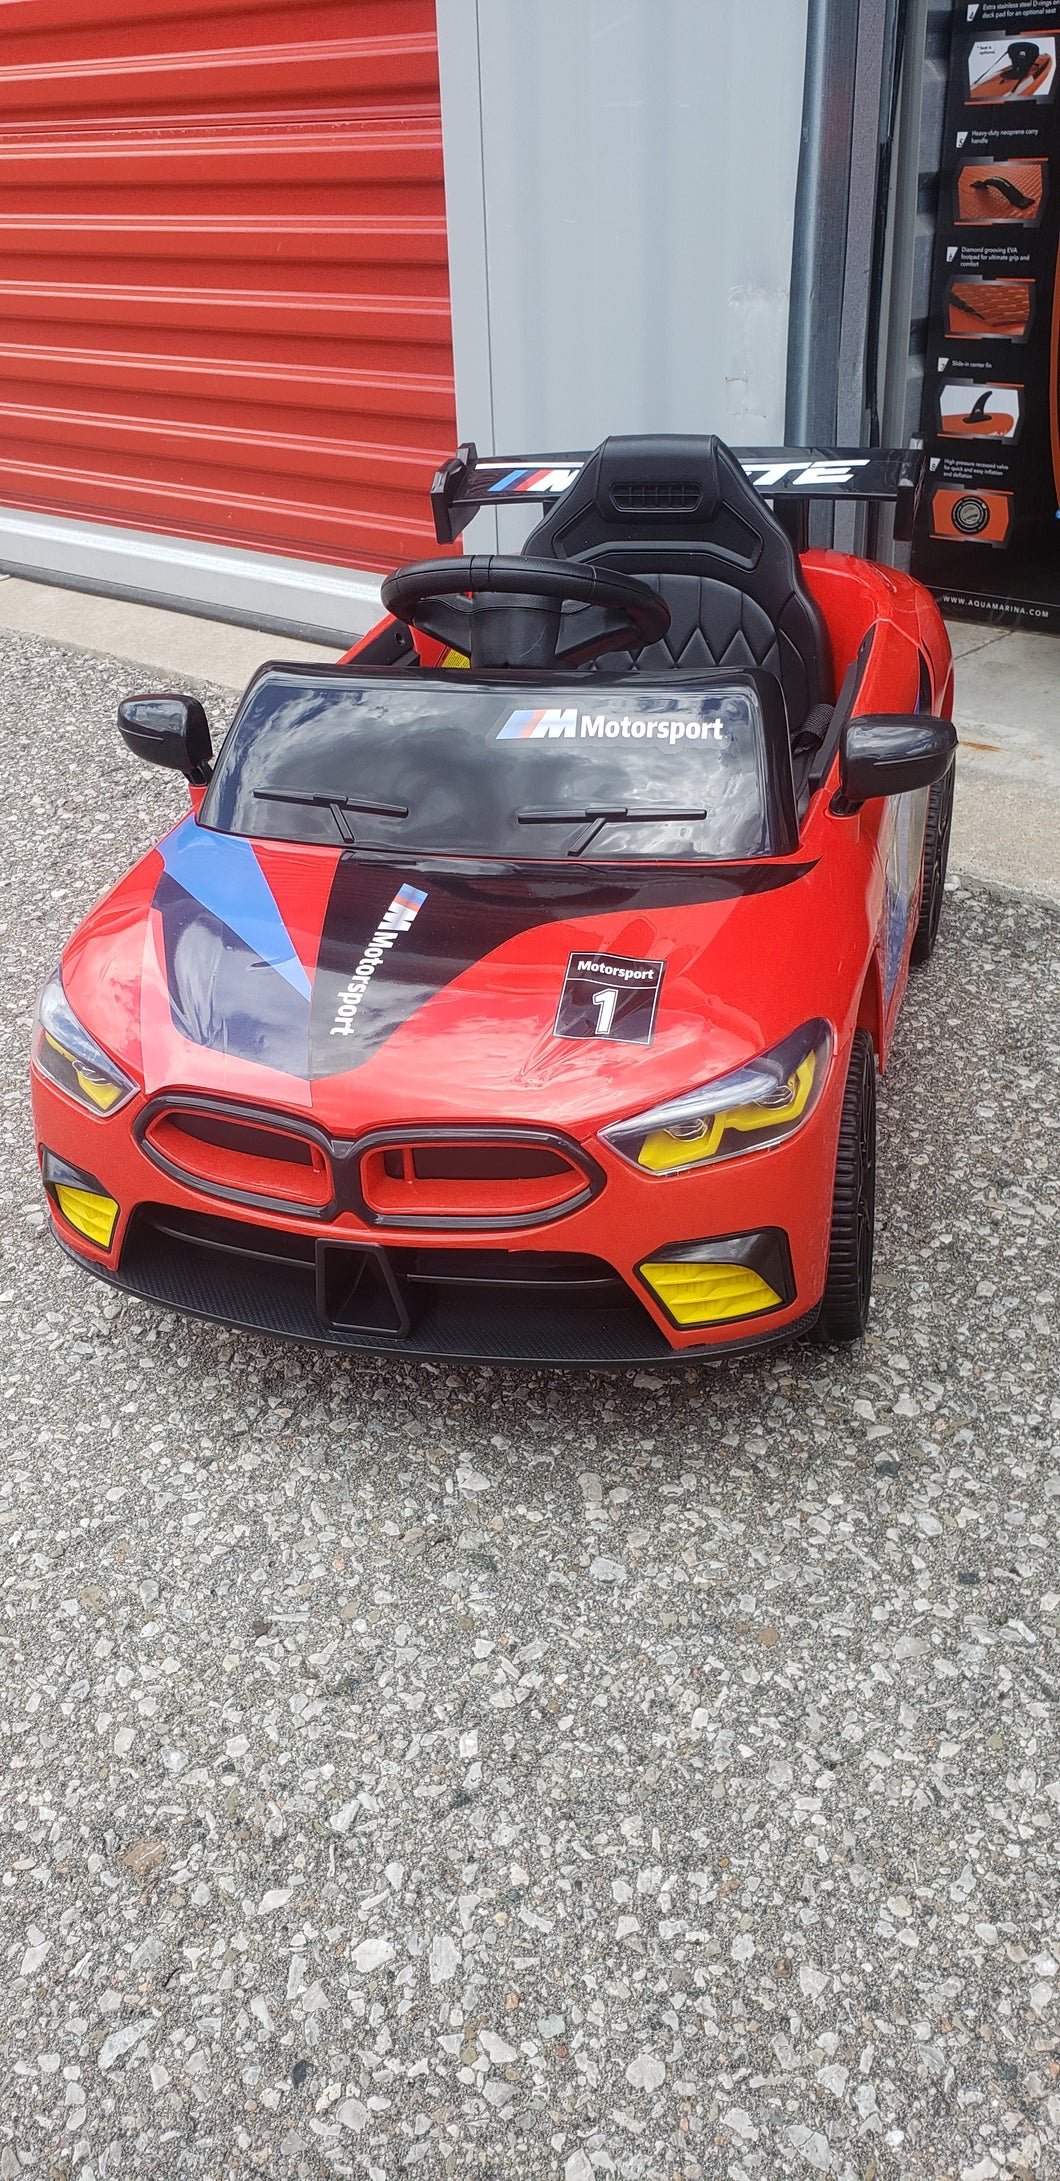 BMW Style Kids Ride On Car with Remote Control with Decals